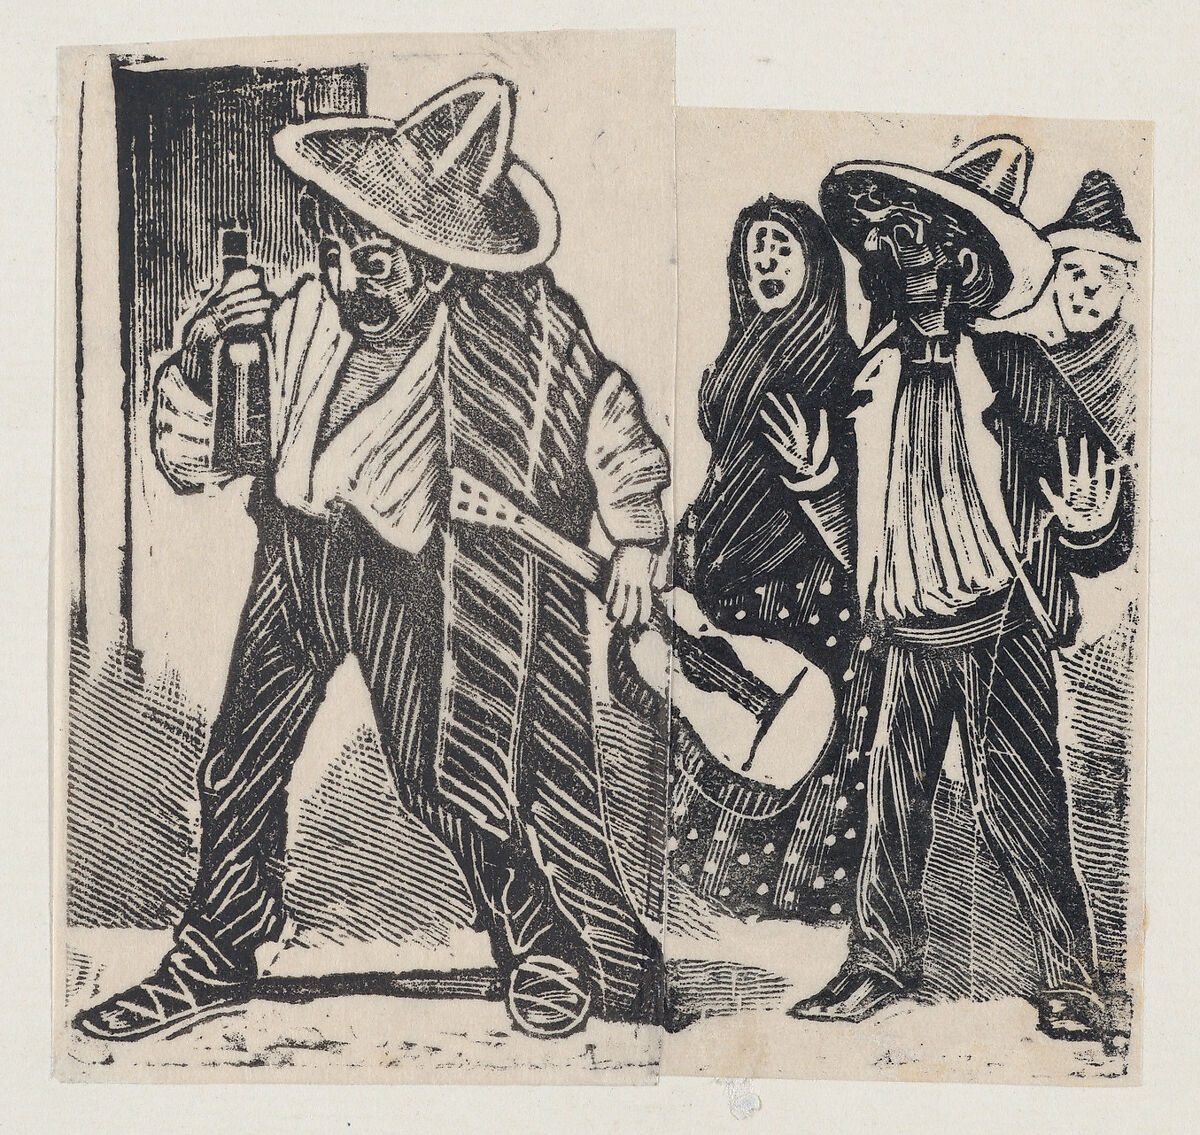 A man holding a bottle and guitar and another man with both hands raised, from a broadside entitled 'Versos de lino matadas', published by Antonio Vanegas Arroyo, José Guadalupe Posada (Mexican, Aguascalientes 1852–1913 Mexico City), Type-metal engraving 